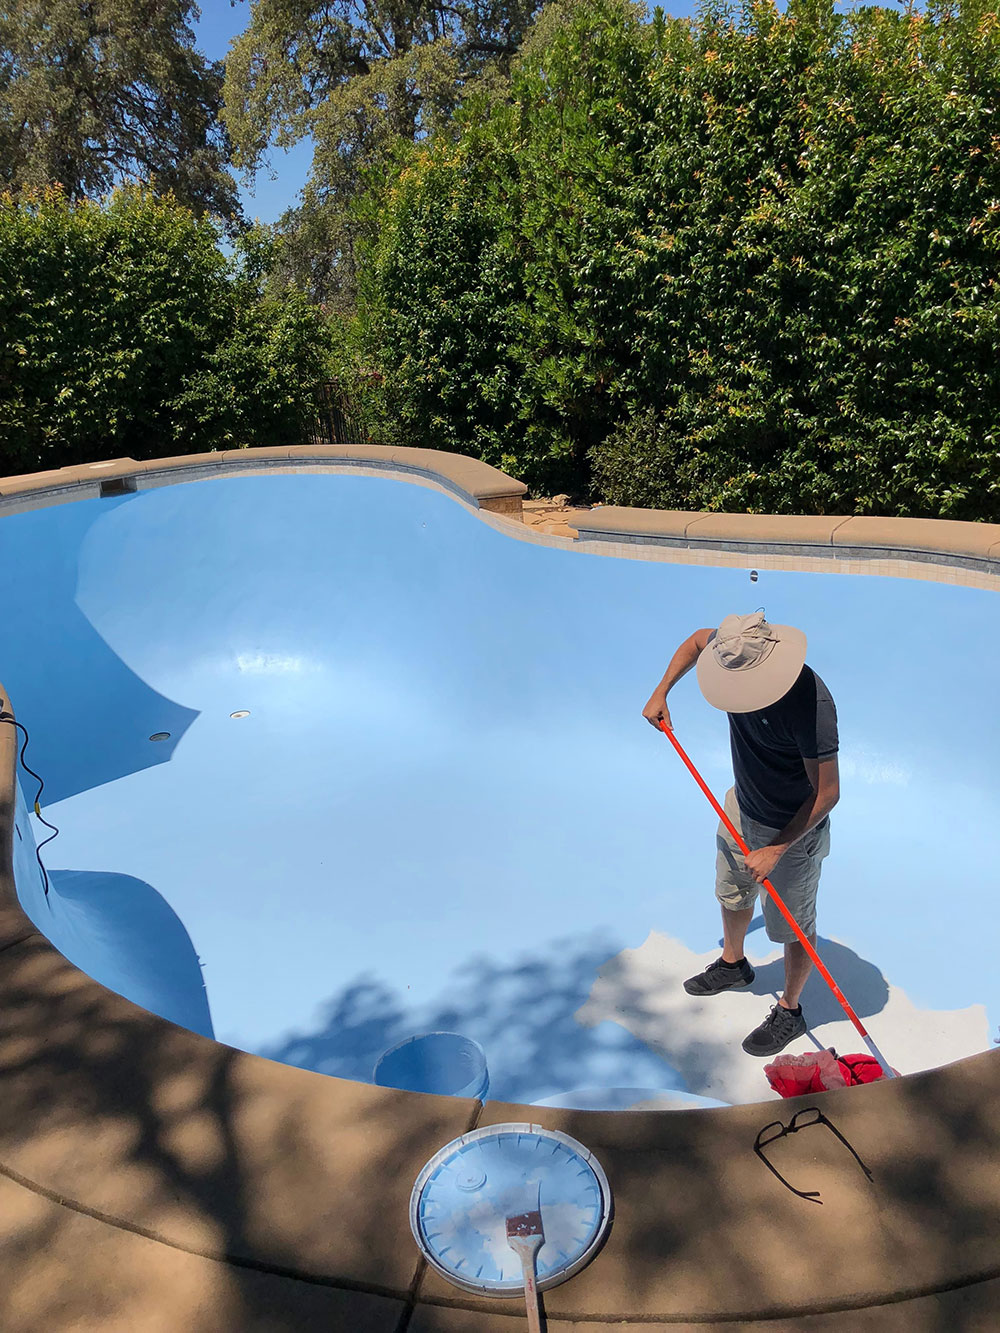 Repair-and-paint-the-pool How to drain a swimming pool fast and easy